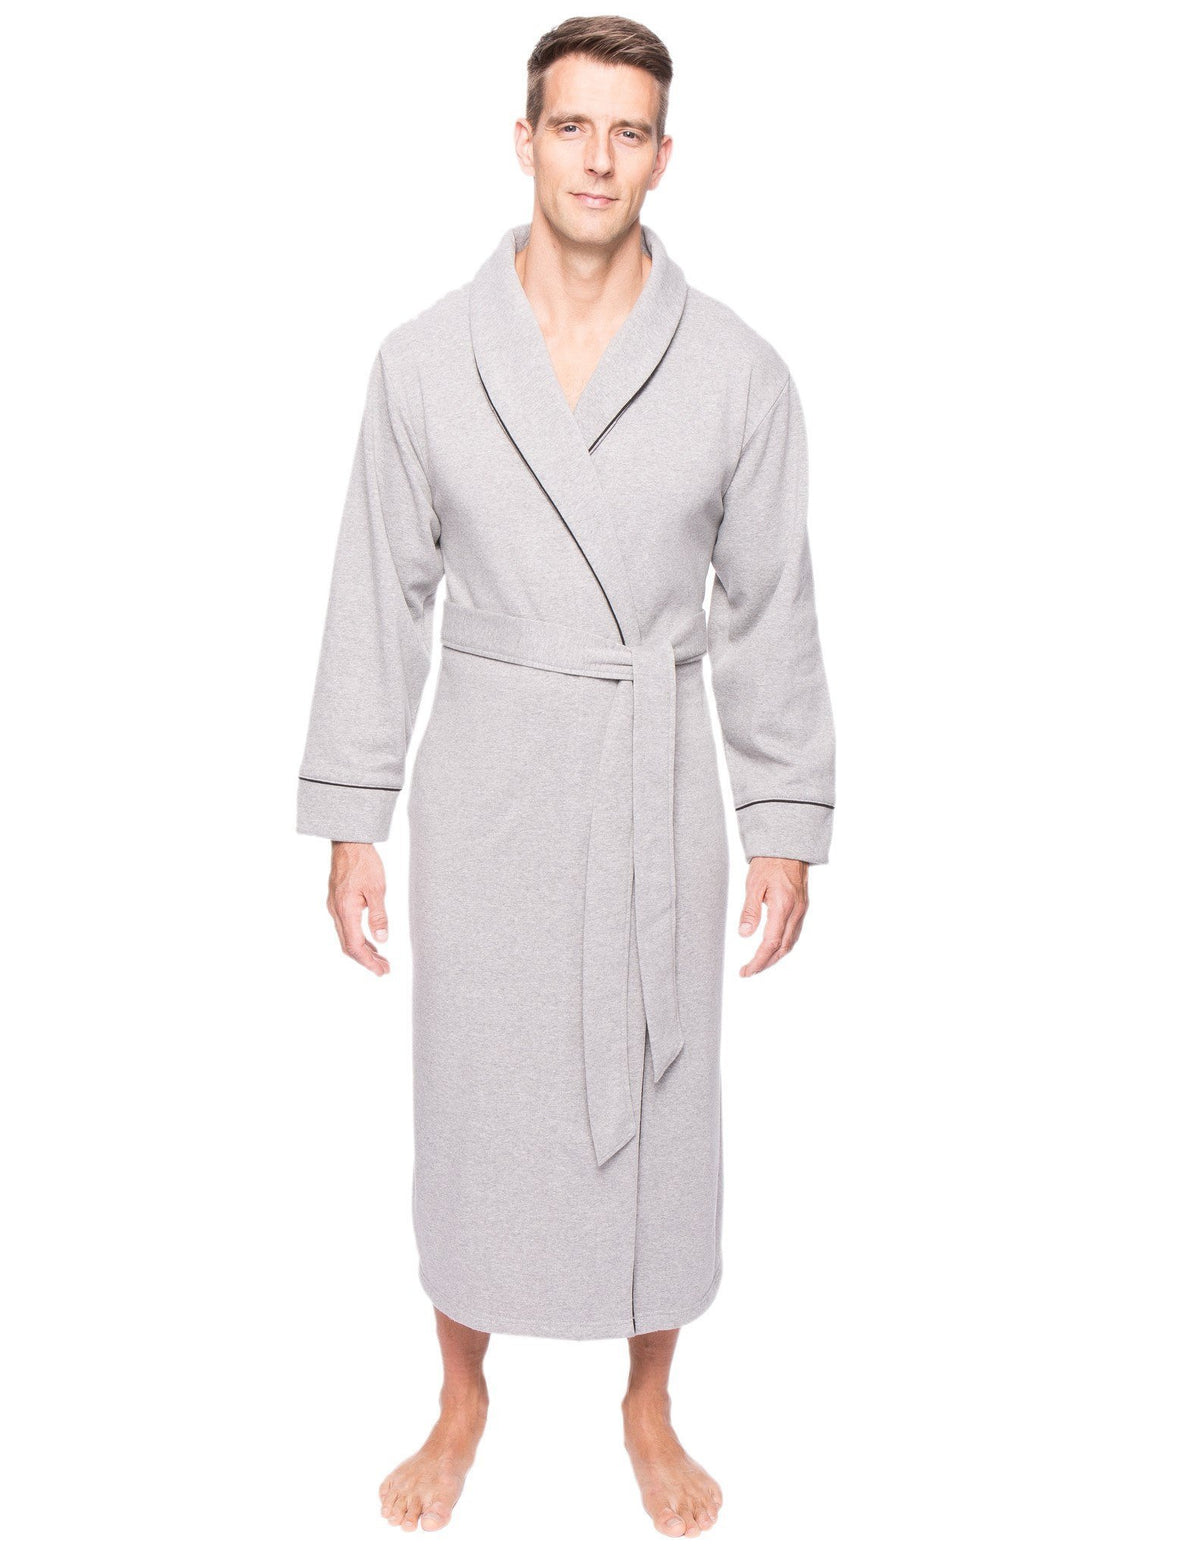 Men's Fleece Lined French Terry Robe - Heather Grey